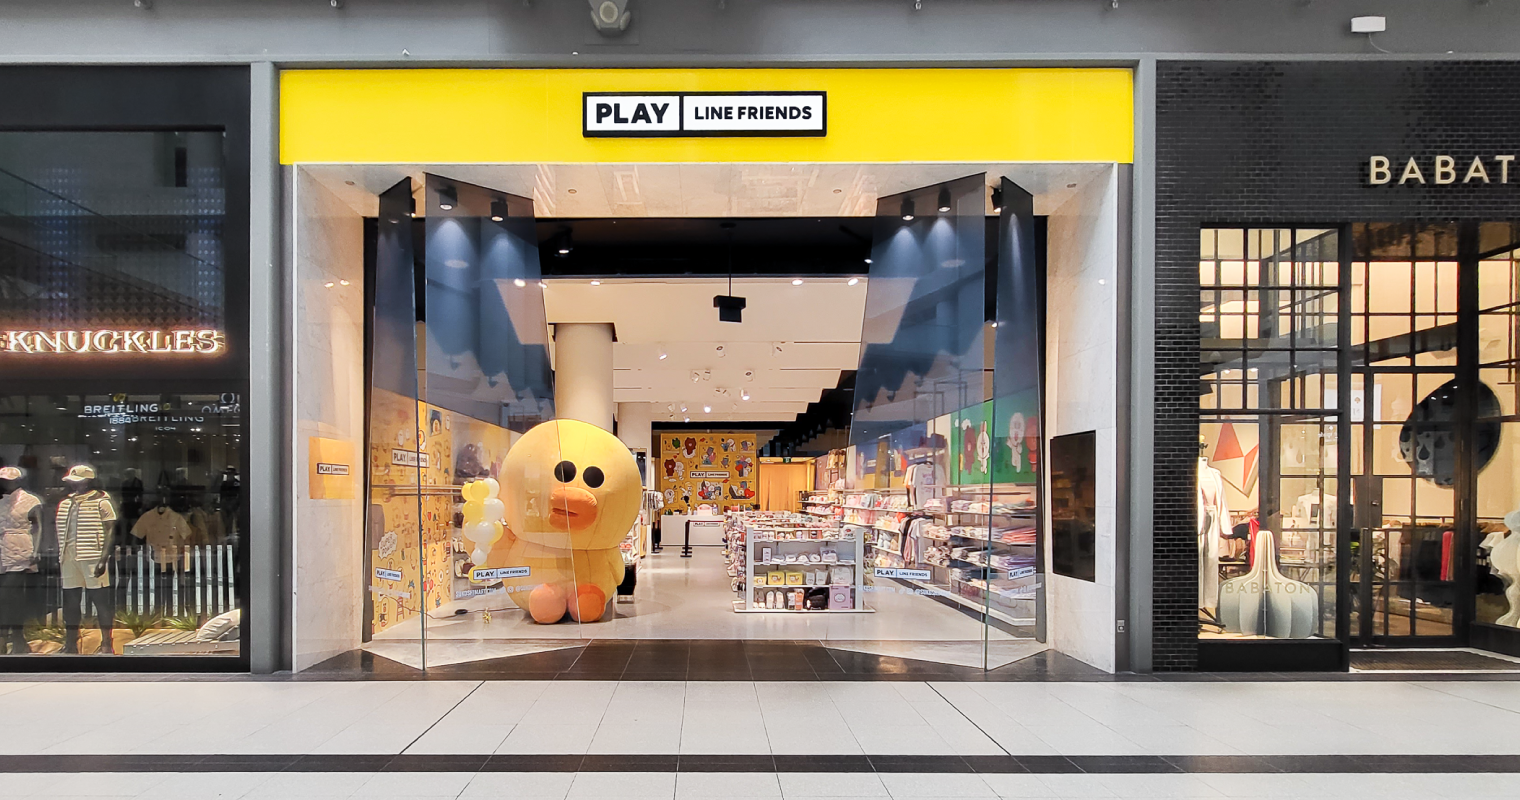 PLAY LINE FRIENDS Toronto Store Front located at the Toronto Eaton Centre